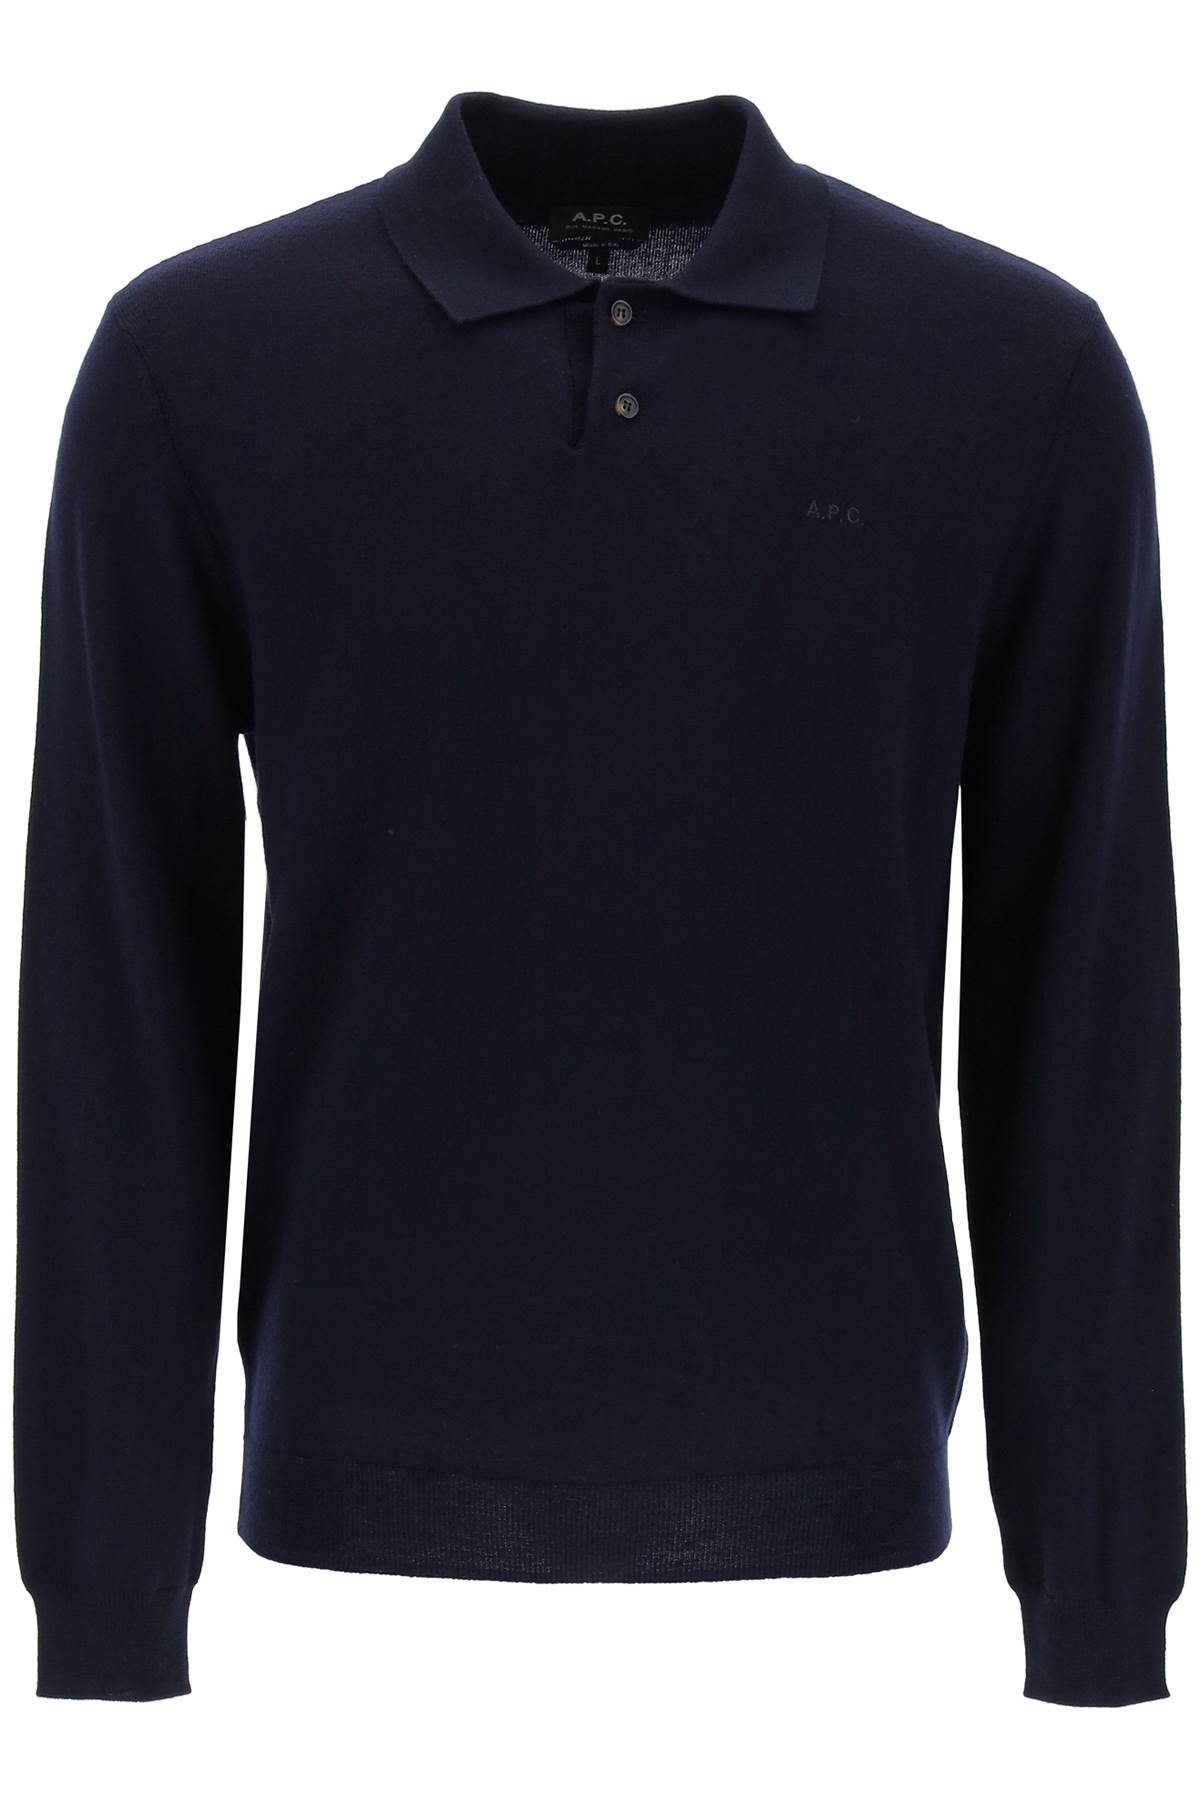 A. P.C. Jacob Wool Pullover Polo Sweater